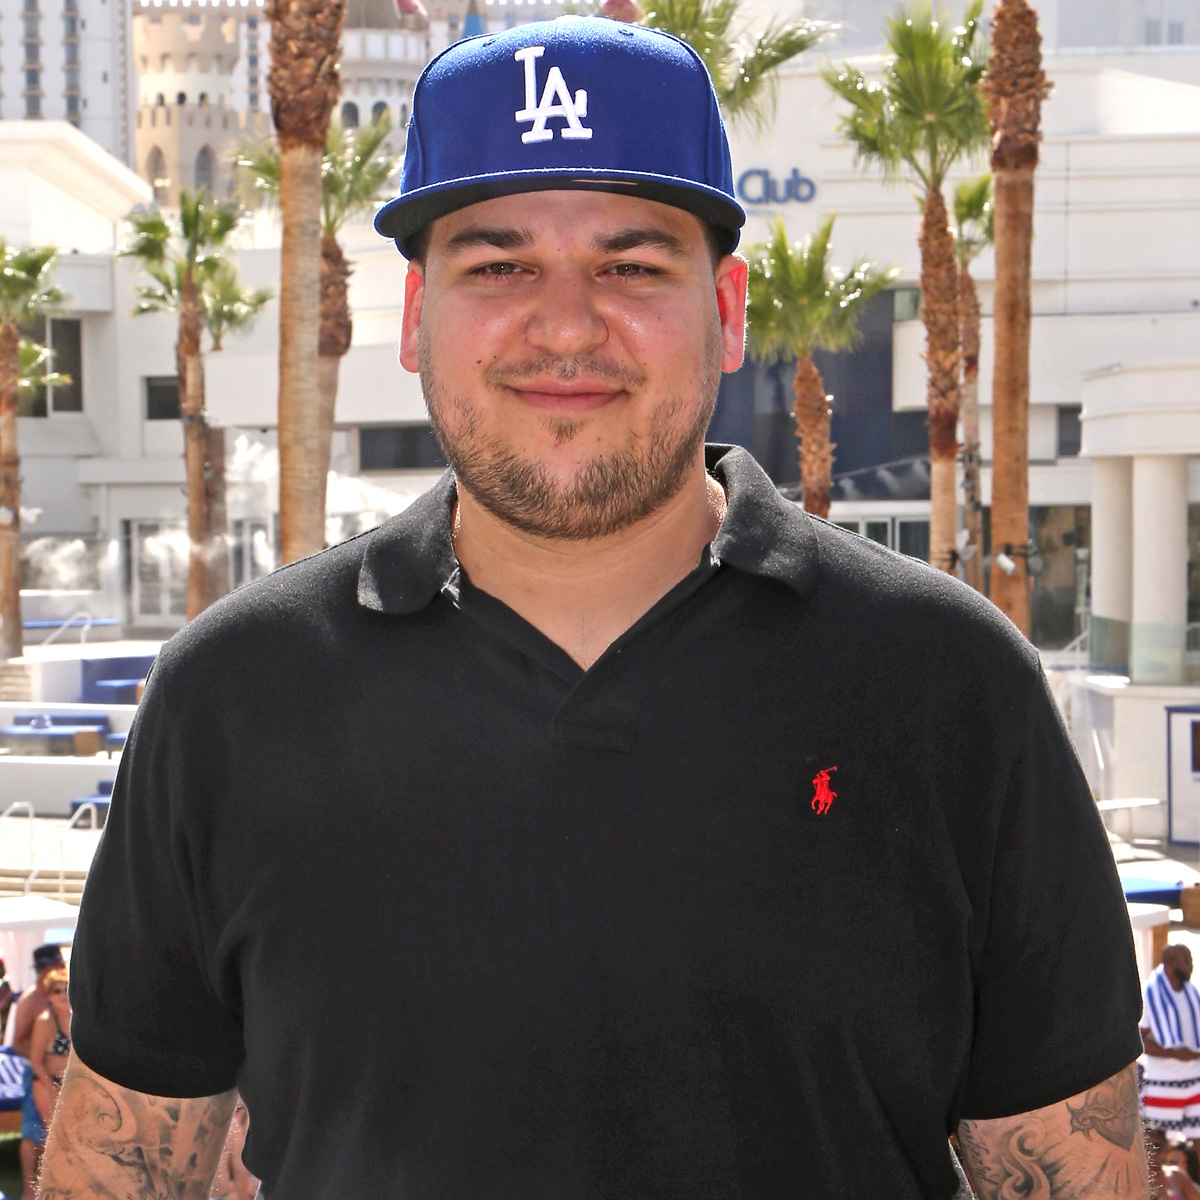  Rob Kardashian 2022: What Happened To Him? Who Is He Dating? Net Worth And Earnings Explored